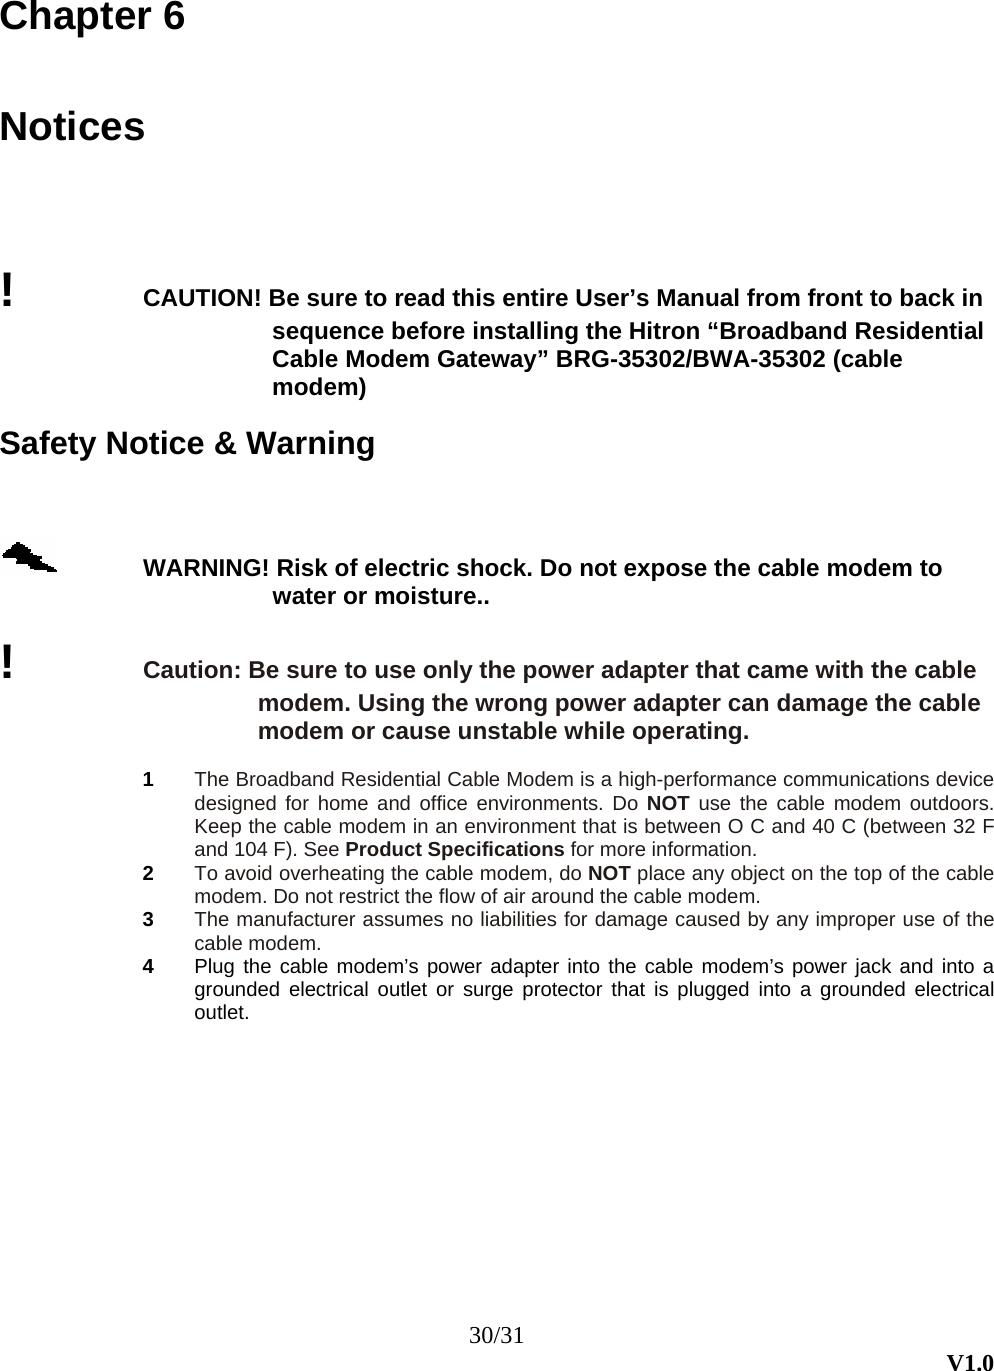 30/31  V1.0 Chapter 6  Notices !  CAUTION! Be sure to read this entire User’s Manual from front to back in sequence before installing the Hitron “Broadband Residential Cable Modem Gateway” BRG-35302/BWA-35302 (cable modem)  Safety Notice &amp; Warning  WARNING! Risk of electric shock. Do not expose the cable modem to water or moisture..  !  Caution: Be sure to use only the power adapter that came with the cable modem. Using the wrong power adapter can damage the cable modem or cause unstable while operating.  1  The Broadband Residential Cable Modem is a high-performance communications device designed for home and office environments. Do NOT use the cable modem outdoors. Keep the cable modem in an environment that is between O C and 40 C (between 32 F and 104 F). See Product Specifications for more information. 2  To avoid overheating the cable modem, do NOT place any object on the top of the cable modem. Do not restrict the flow of air around the cable modem.   3  The manufacturer assumes no liabilities for damage caused by any improper use of the cable modem. 4  Plug the cable modem’s power adapter into the cable modem’s power jack and into a grounded electrical outlet or surge protector that is plugged into a grounded electrical outlet. 